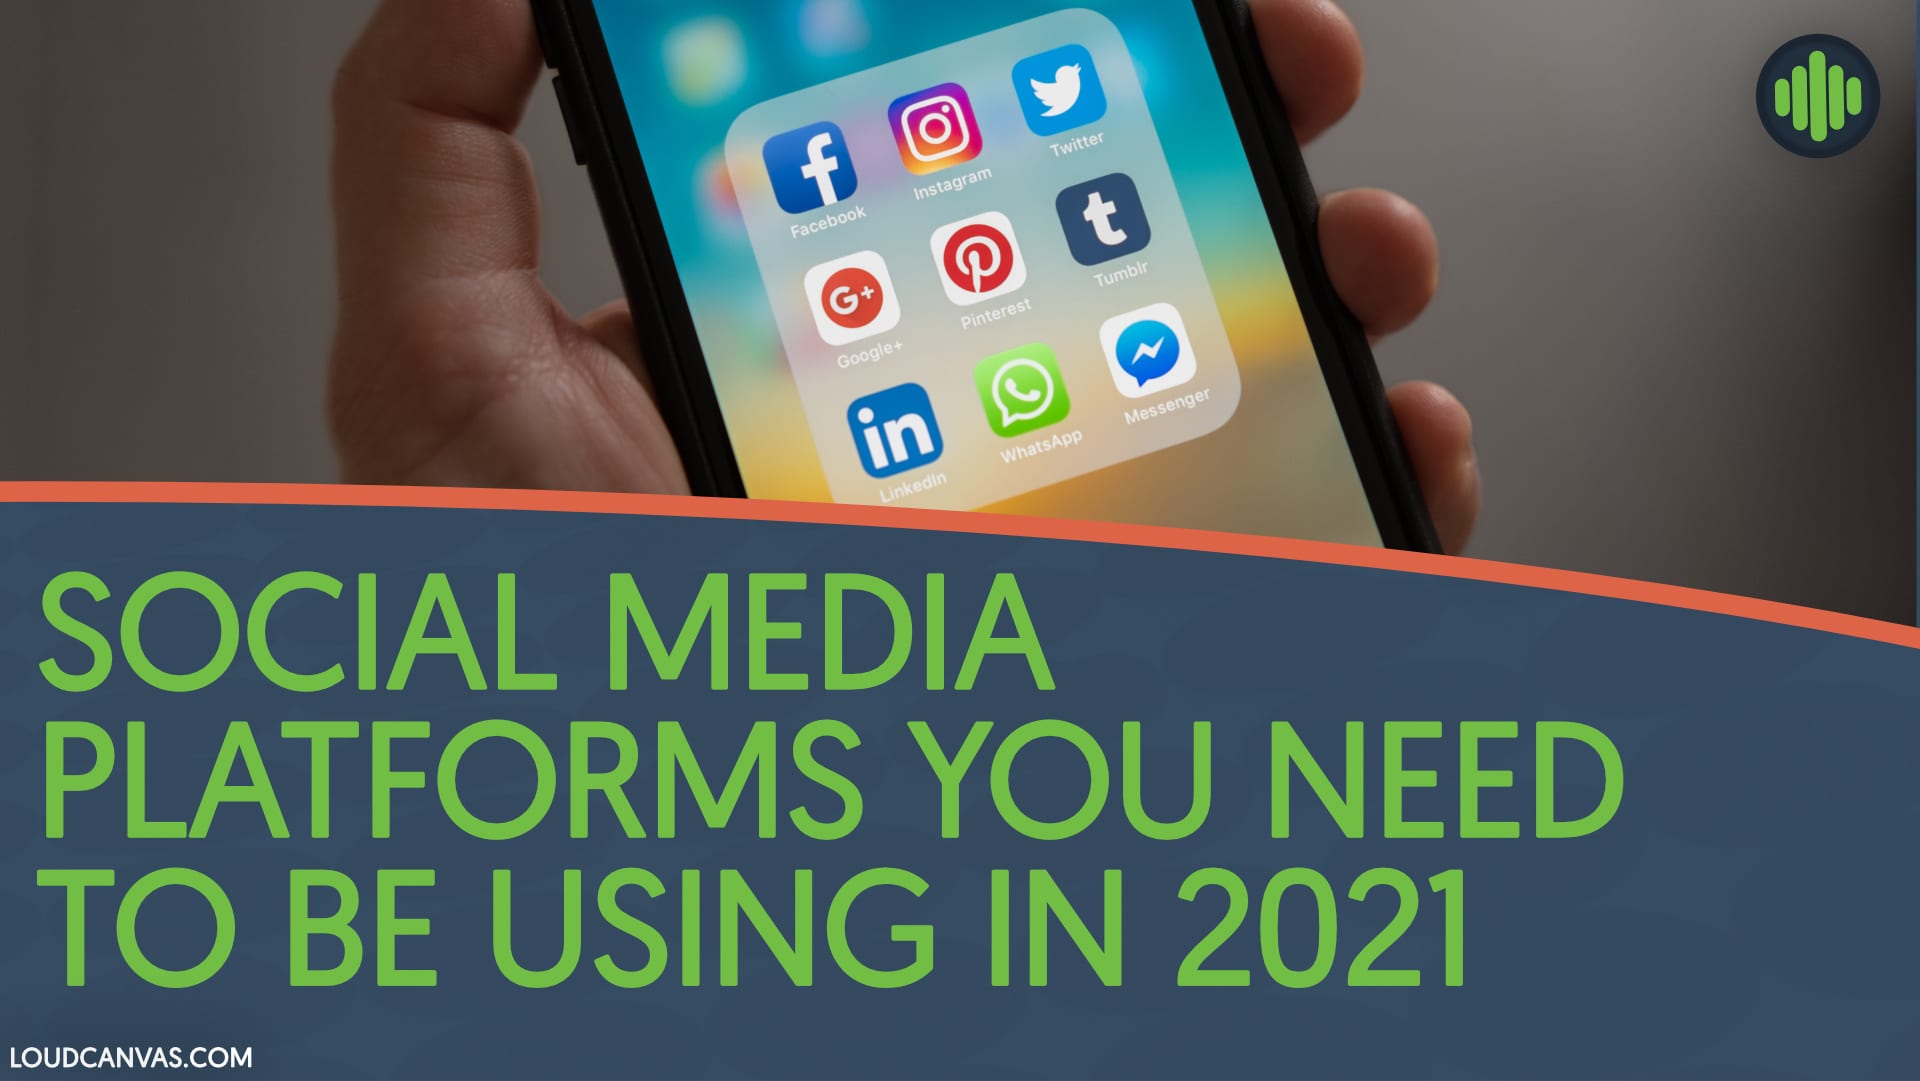 Social Media Platforms You Need To Be Using In 2021